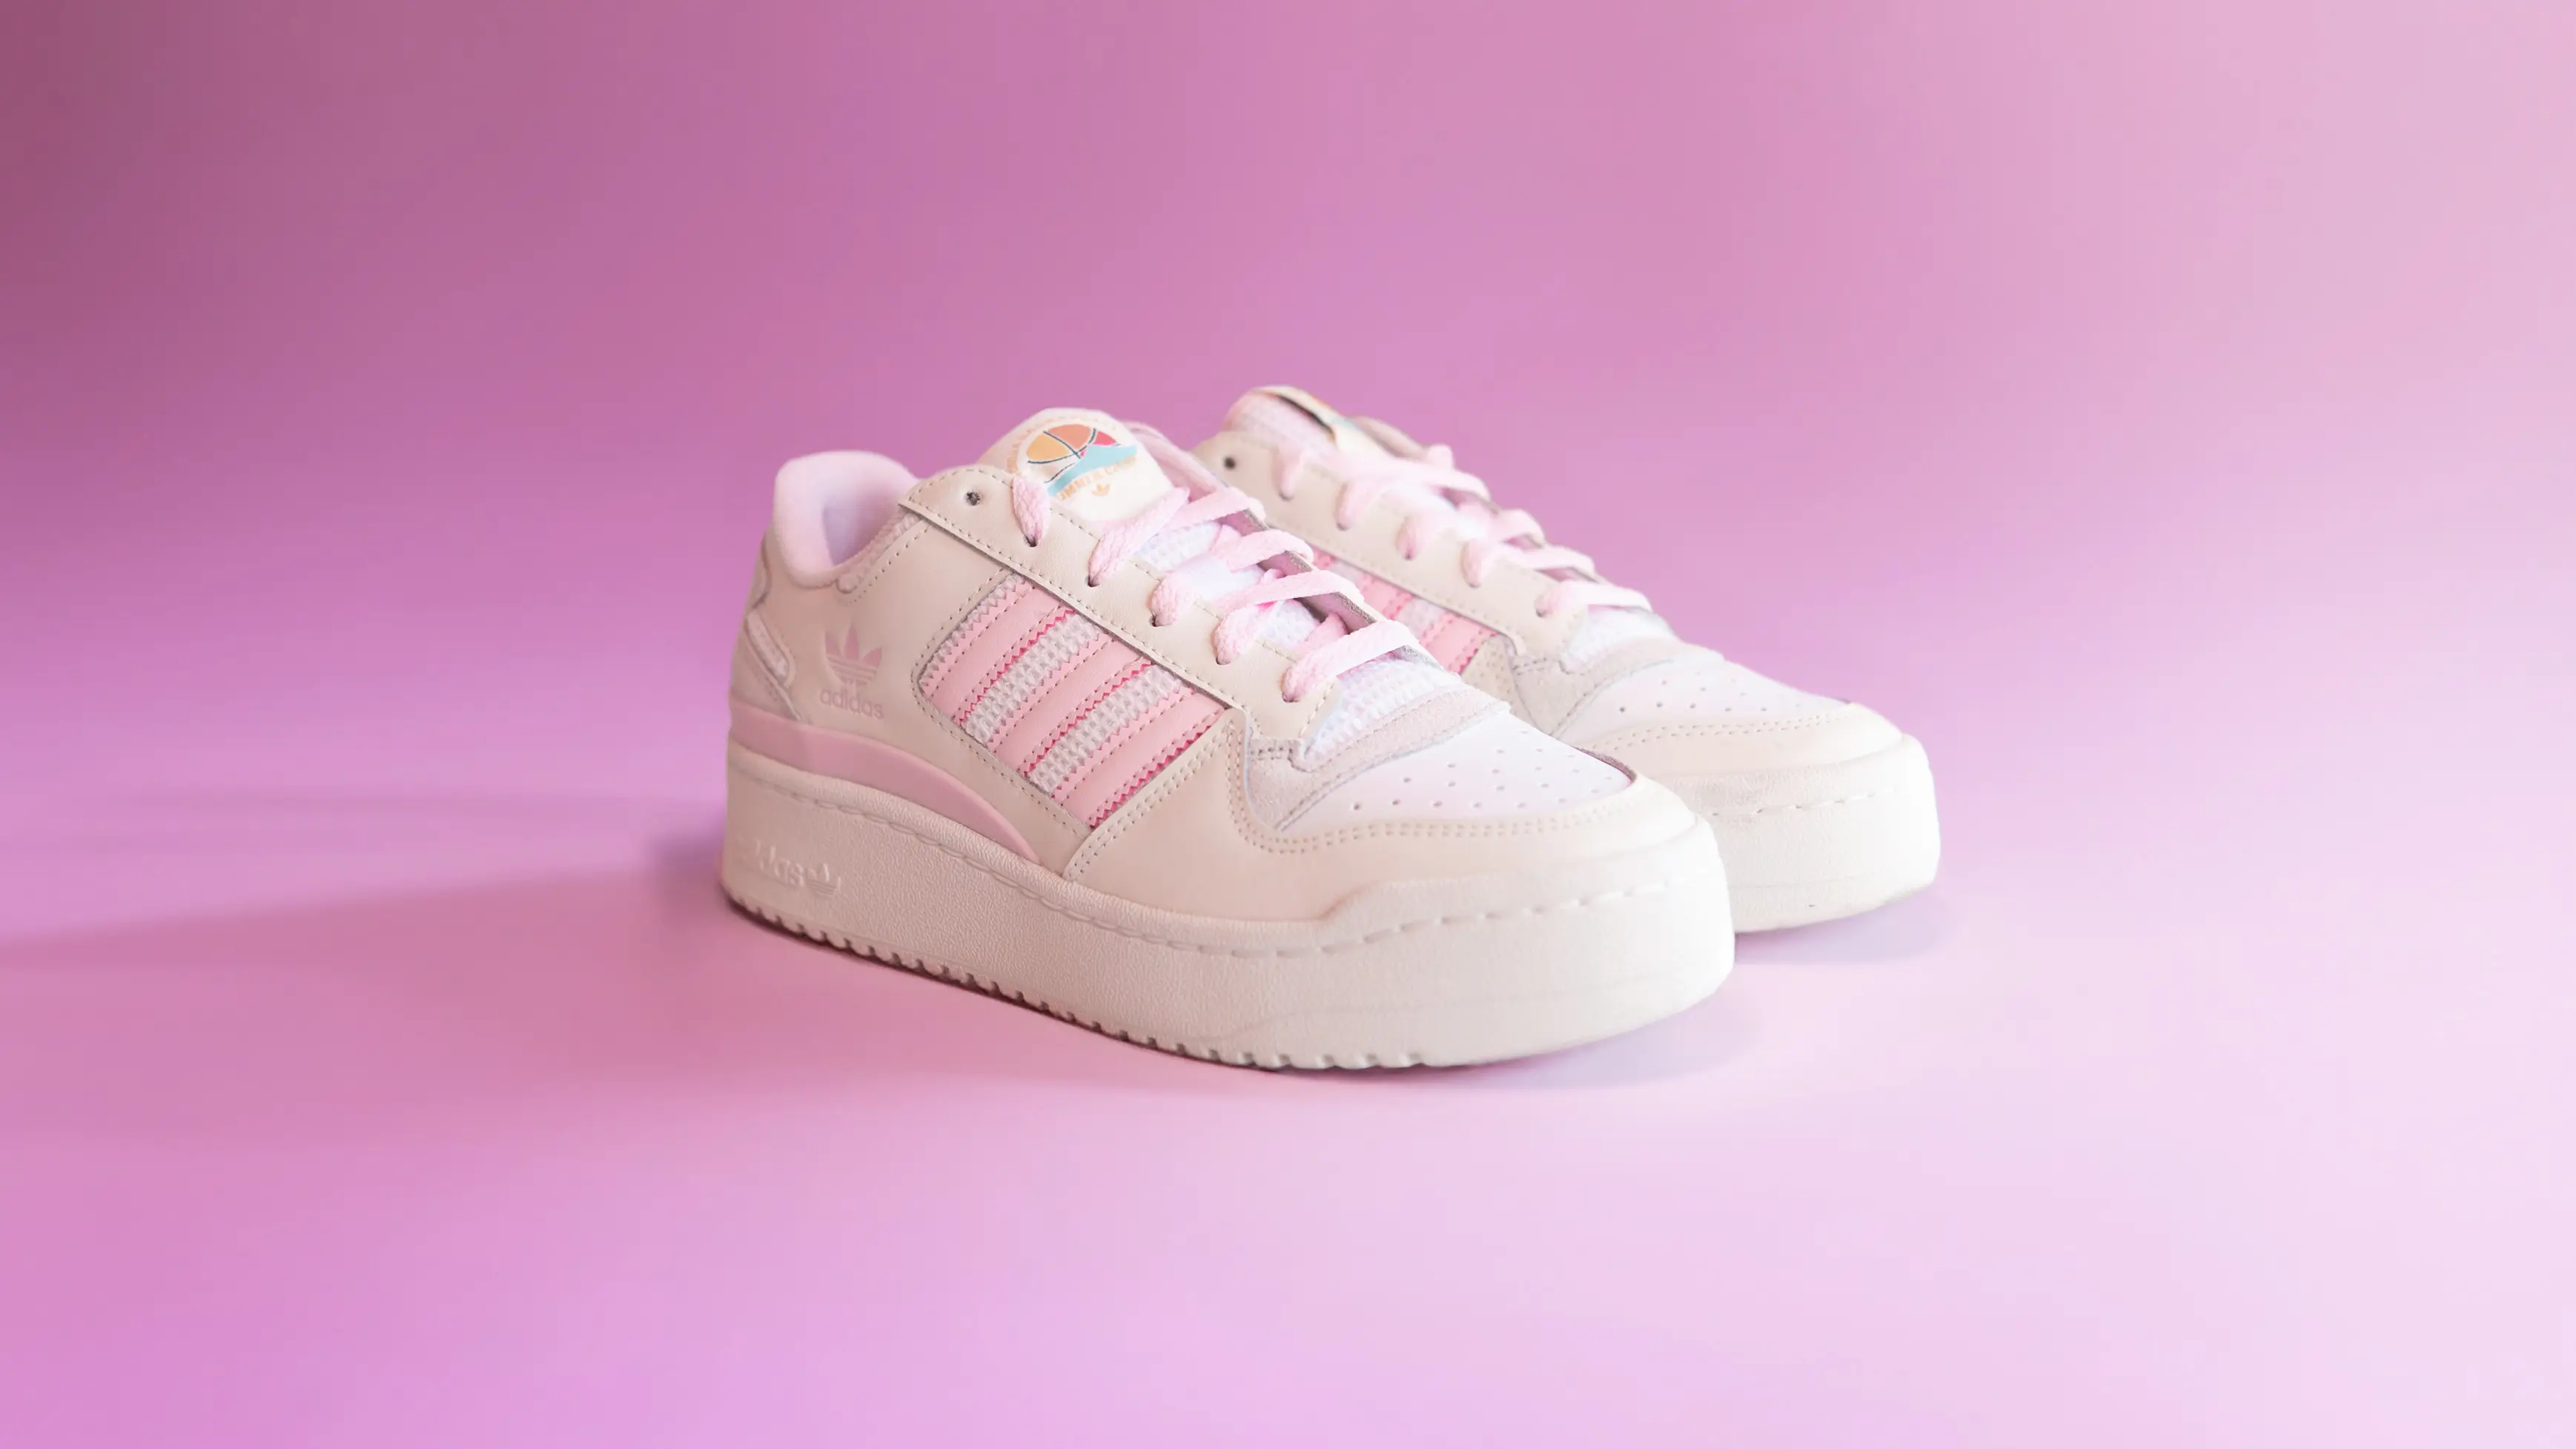 adidas Veste Terrex Lite Down Continues With This Cream & Pink adidas Forum Bold